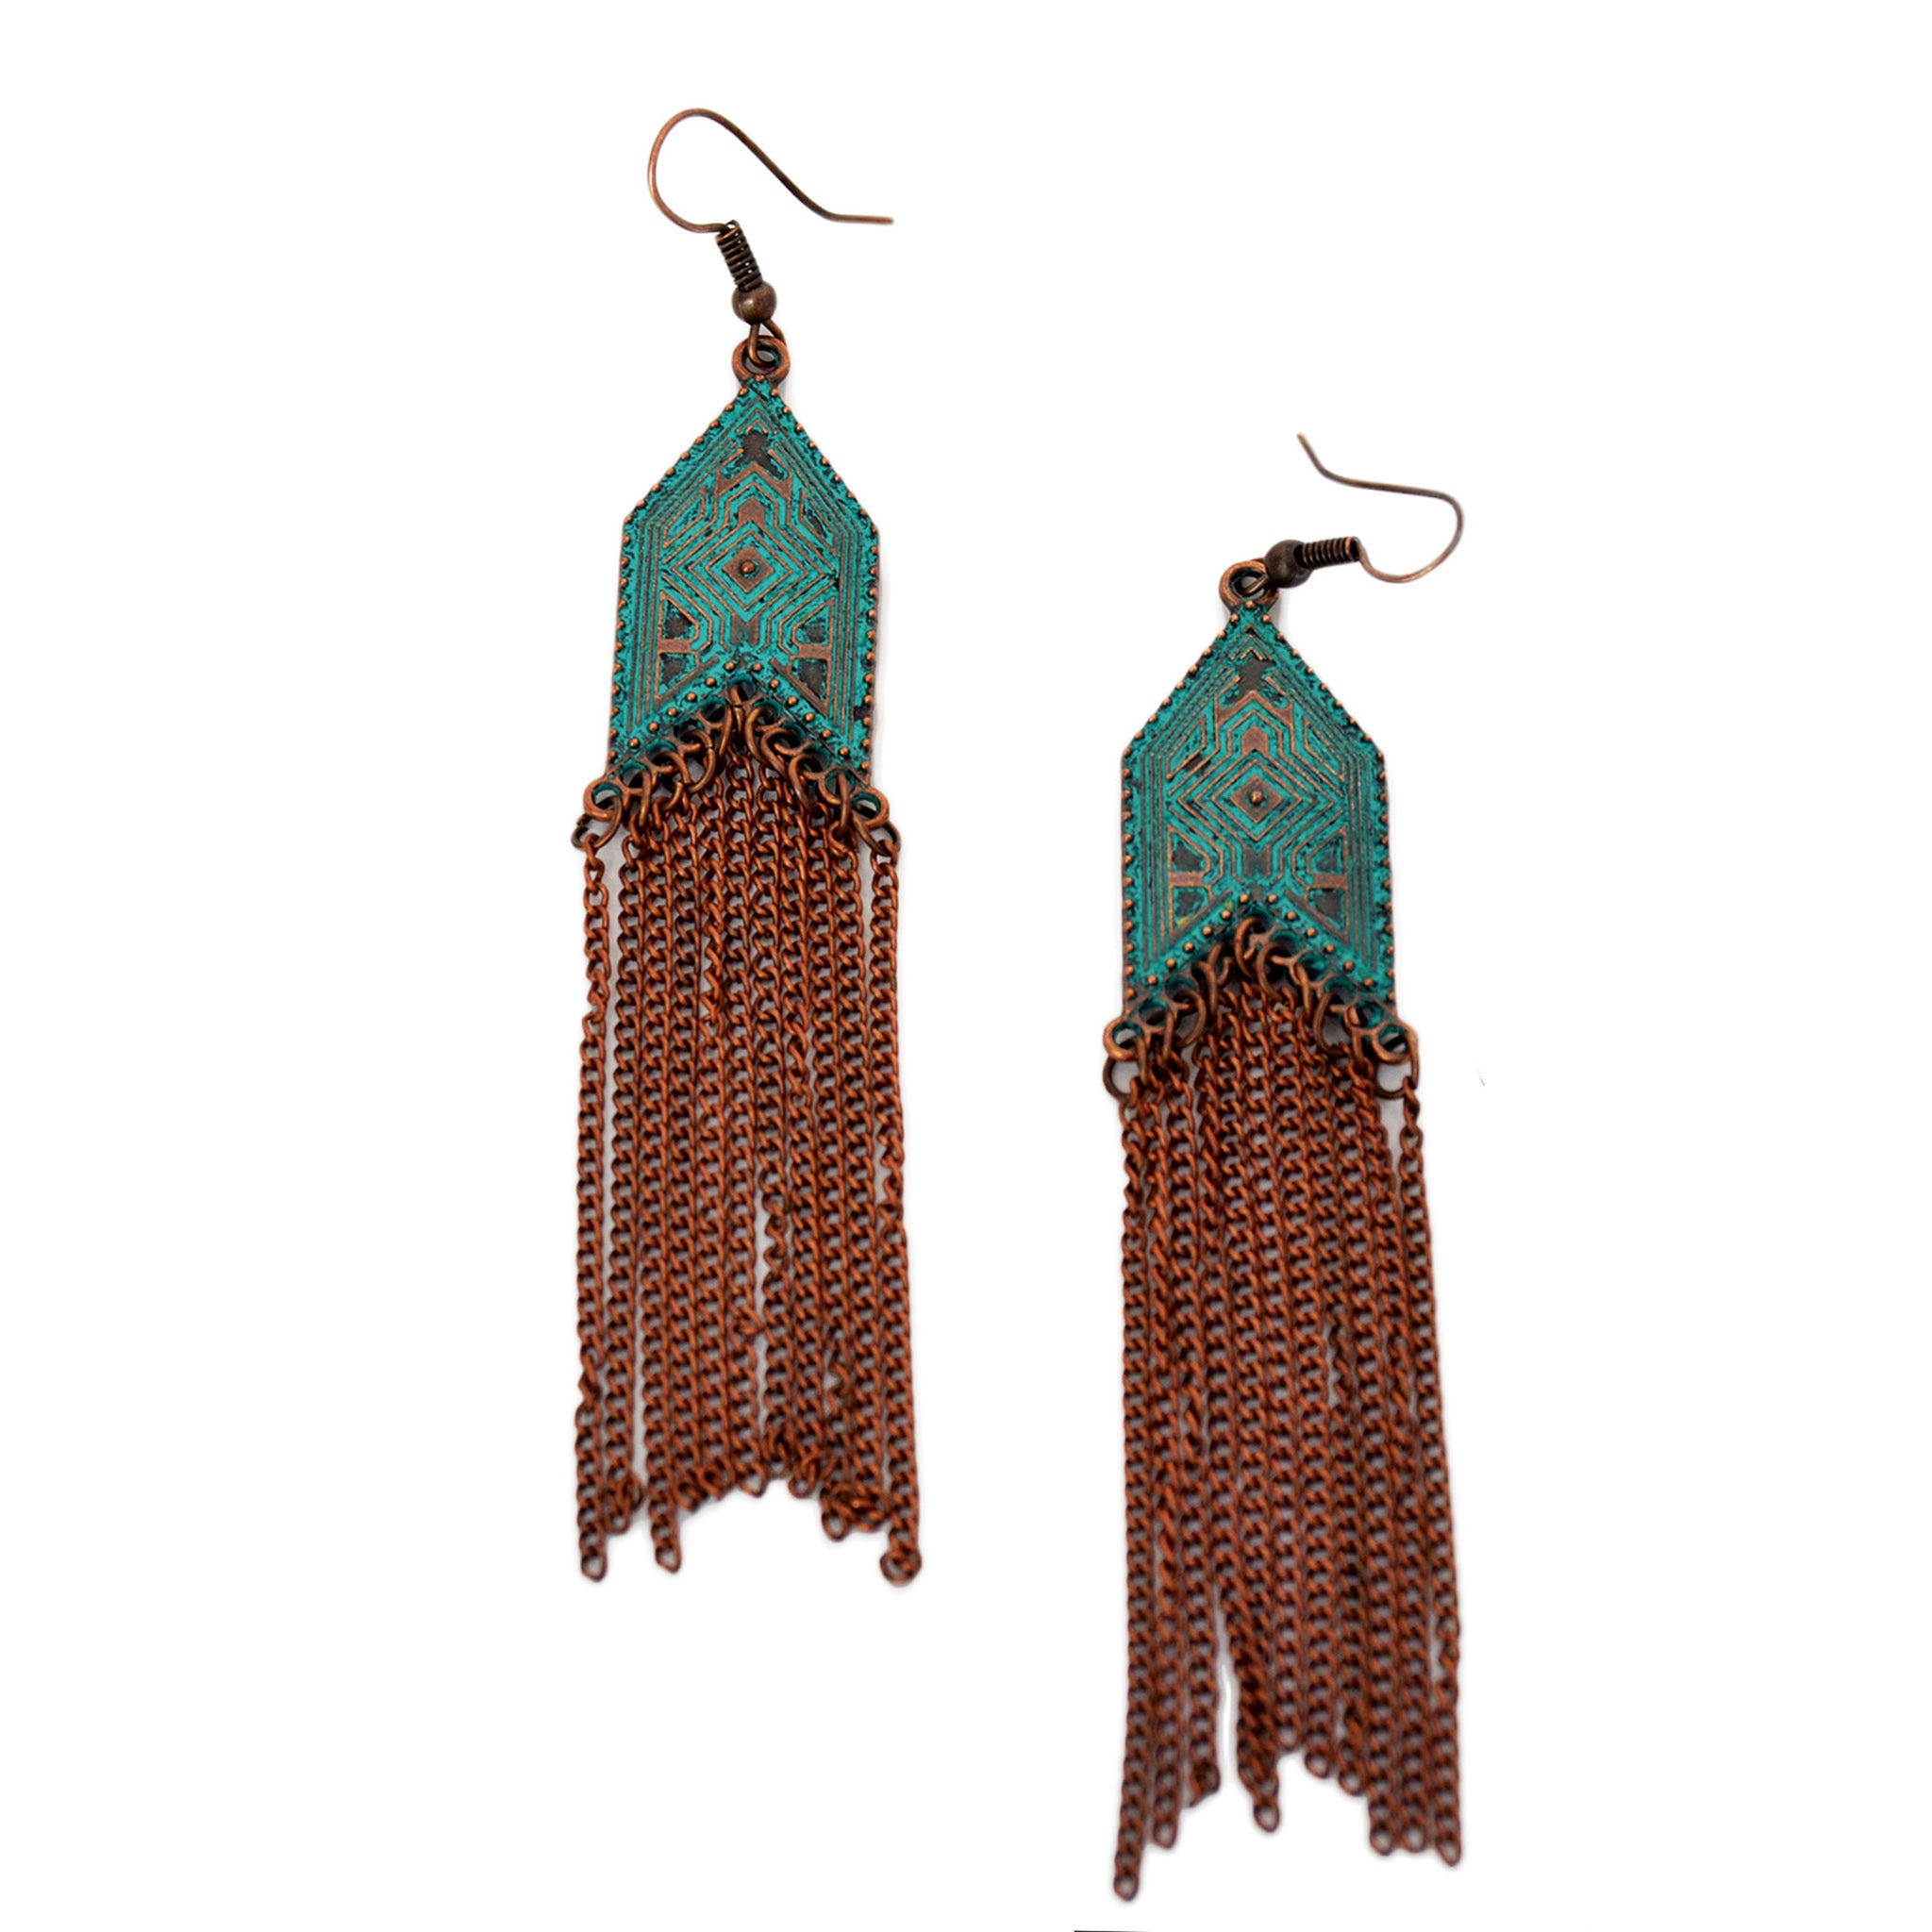 Multi chain dangly earrings with geometric design and green blue patina on copper